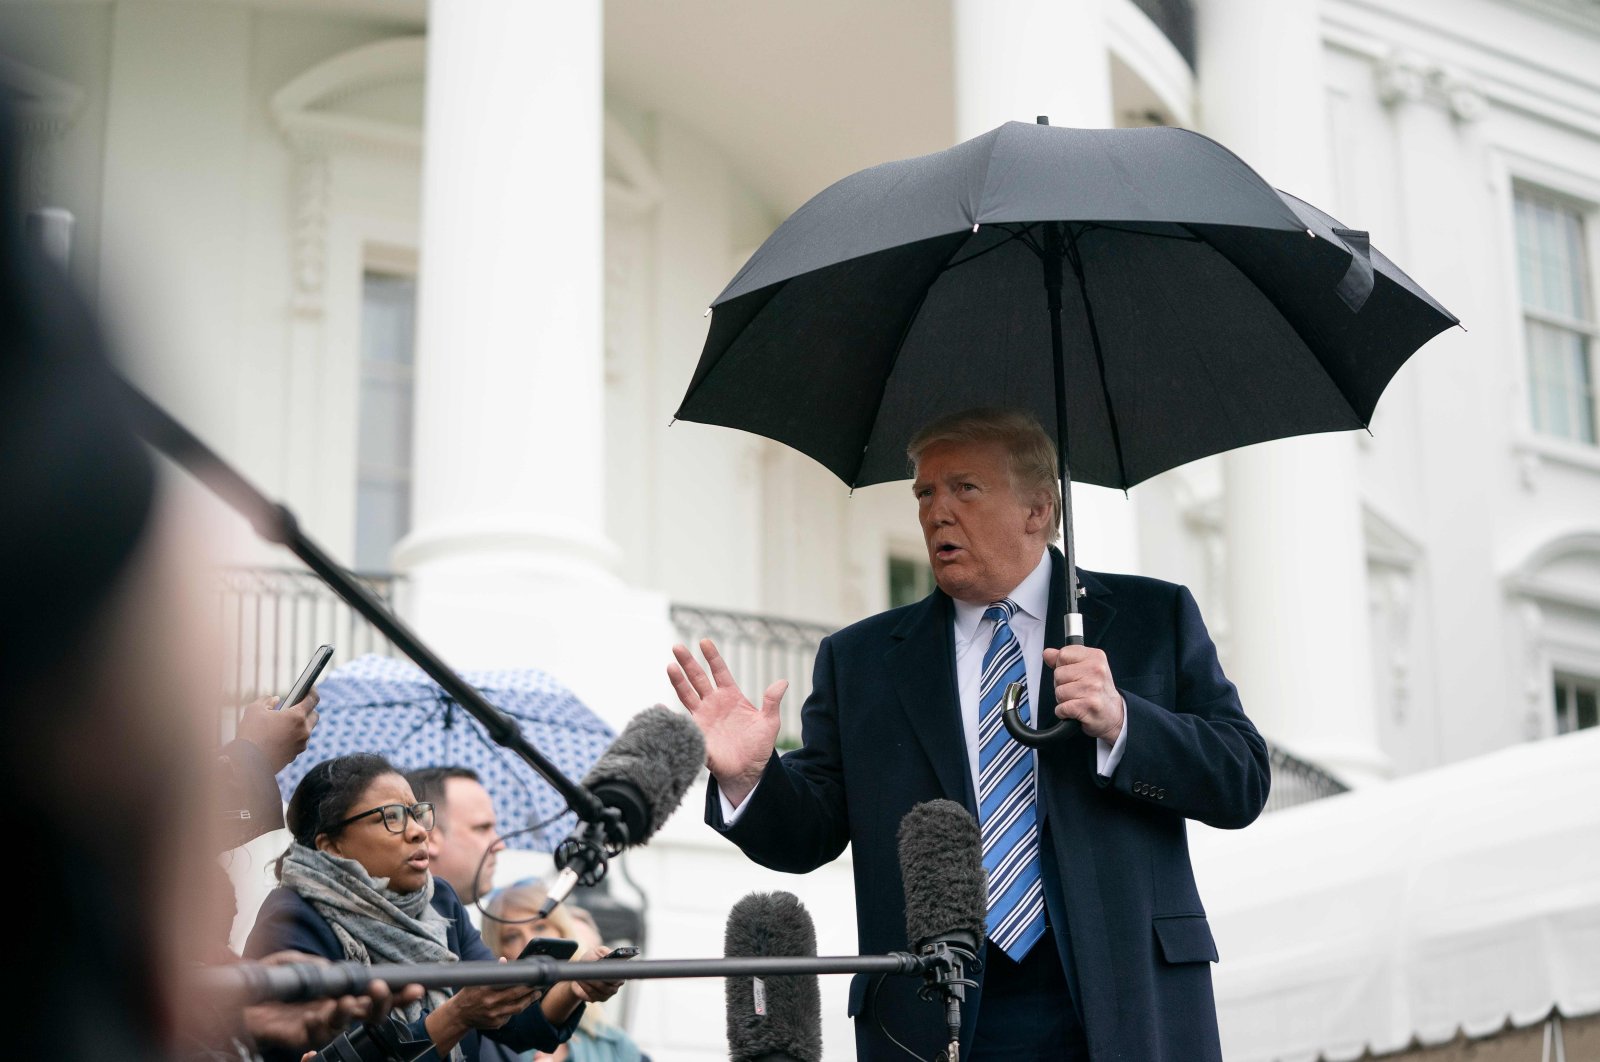 U.S. President Donald Trump speaks to the press as he departs the White House in Washington, DC, on Saturday, March 28, 2020. (AFP Photo)